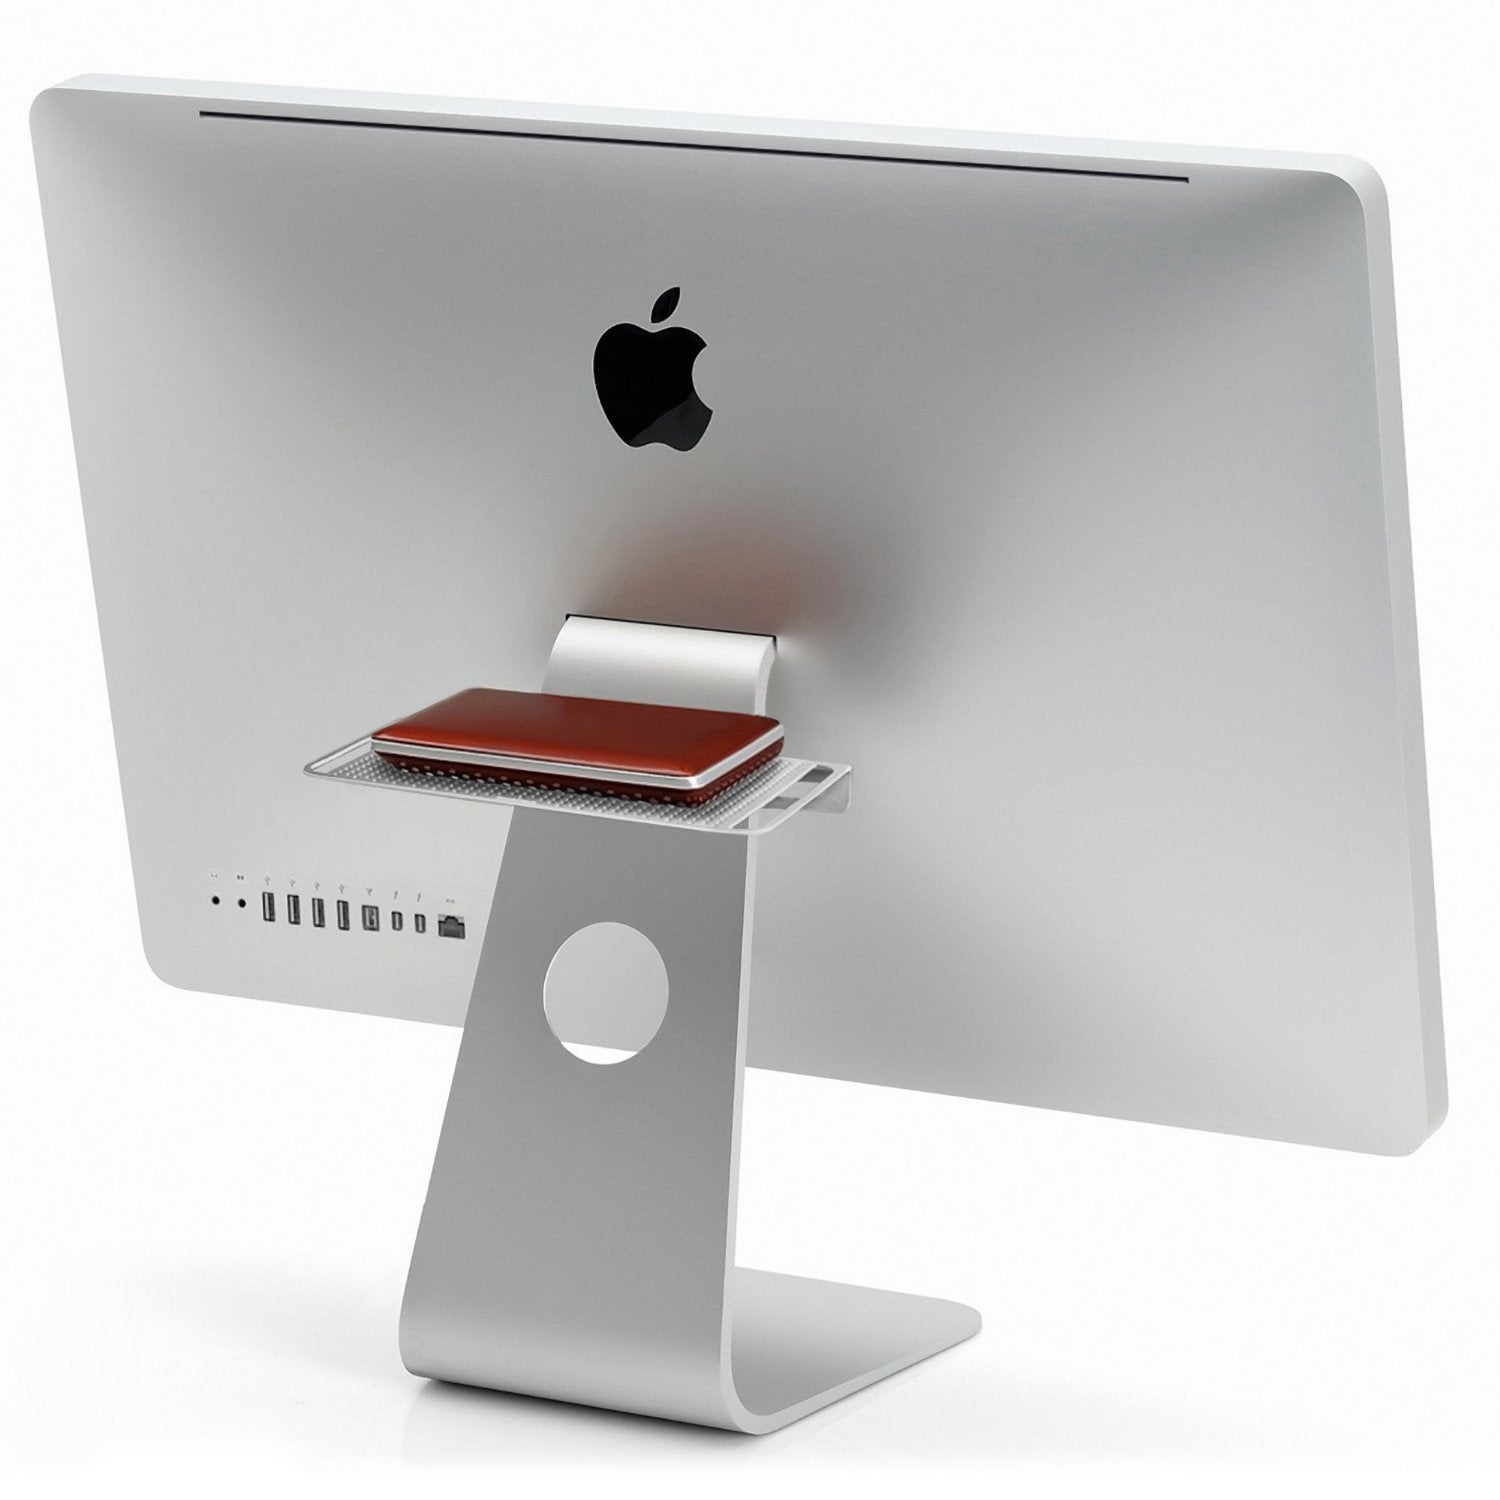 create mac os usb for another mac